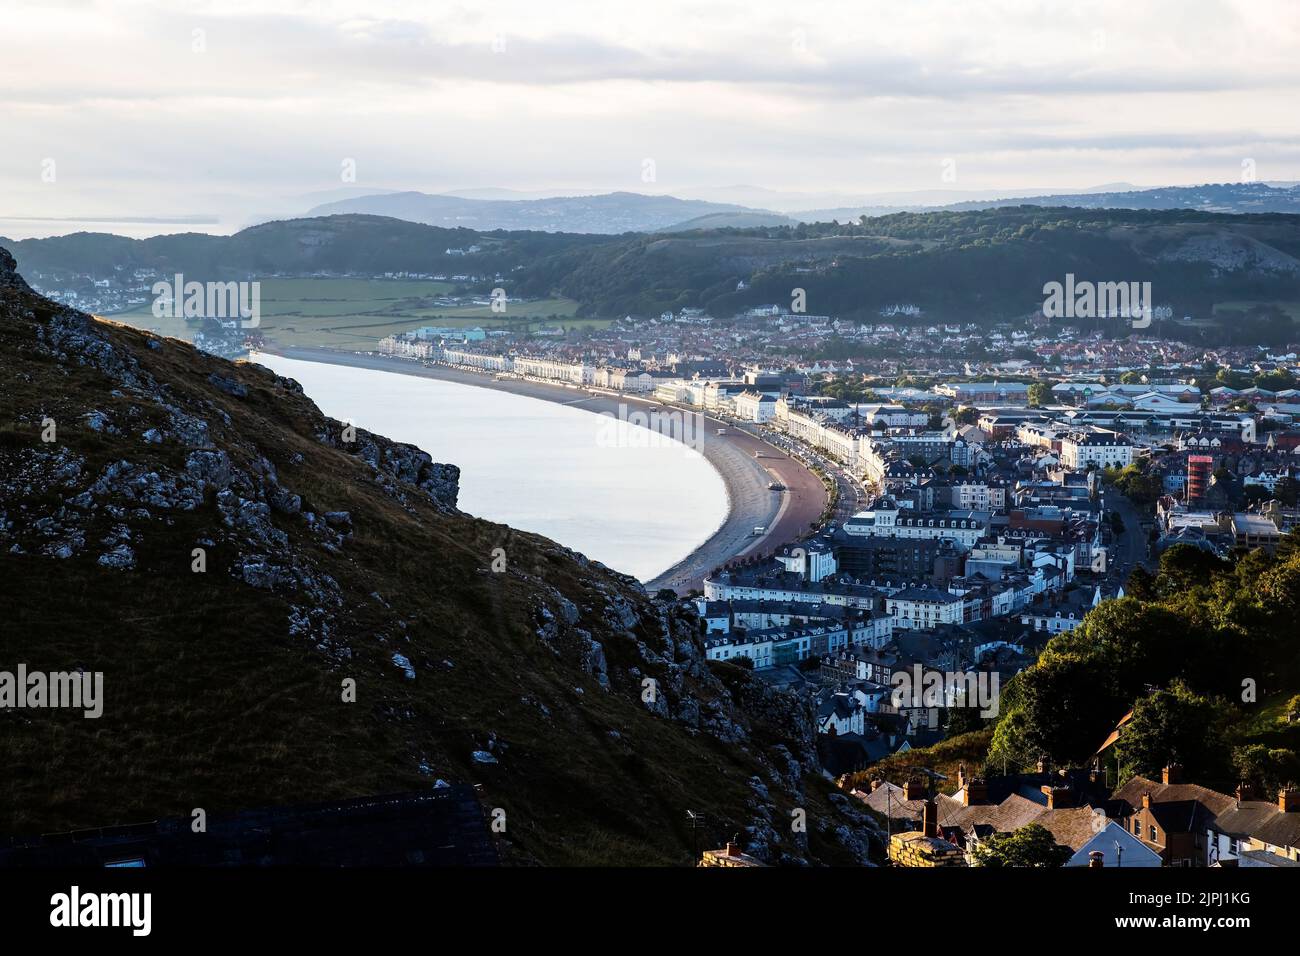 Llandudno resort North Shore, Hotels and Promenade lit by the first rays of sunrise over the Irish Sea in Summer as dawn breaks Stock Photo